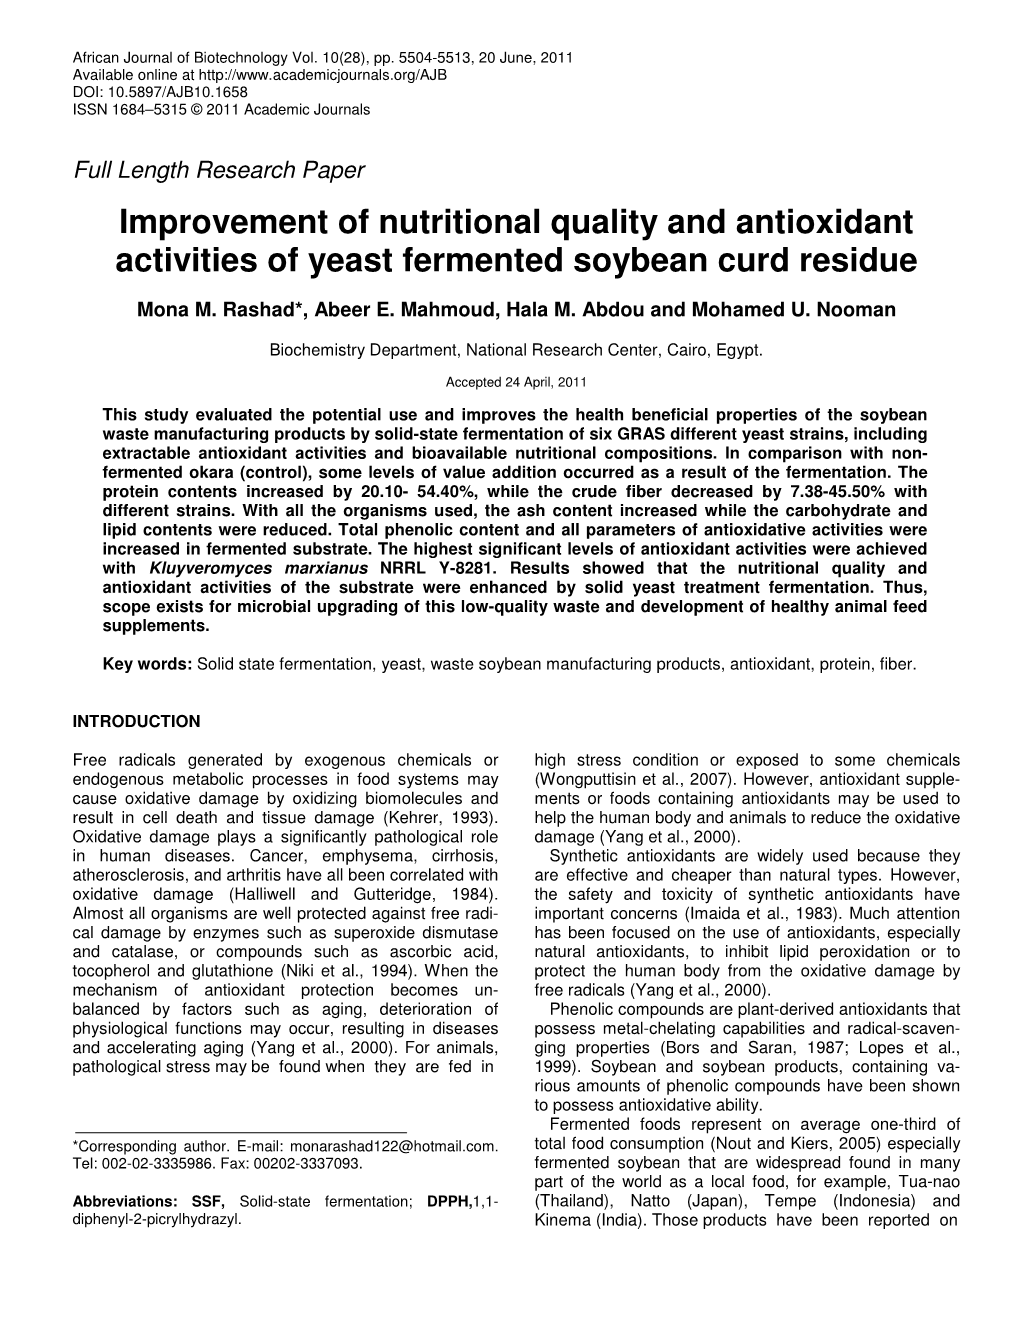 Improvement of Nutritional Quality and Antioxidant Activities of Yeast Fermented Soybean Curd Residue